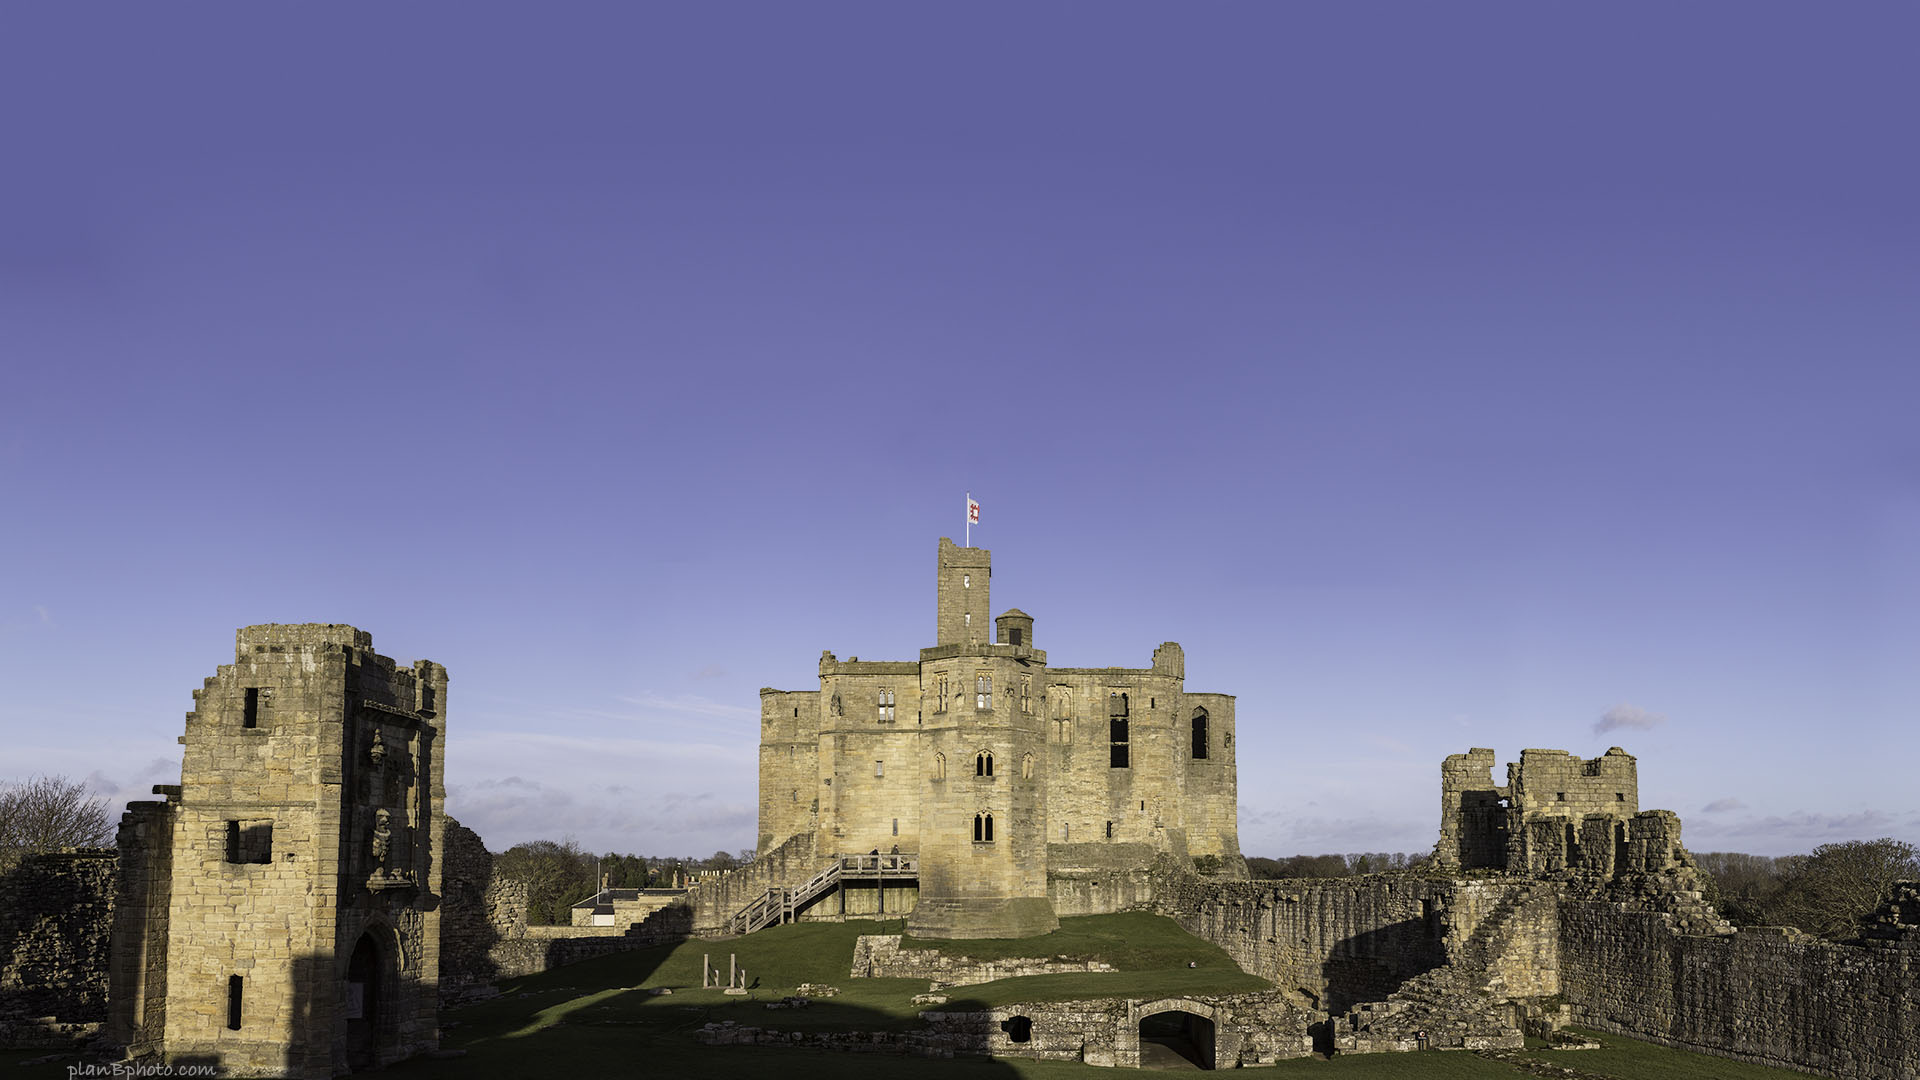 Inner ward with the keep of Warkworth Castle